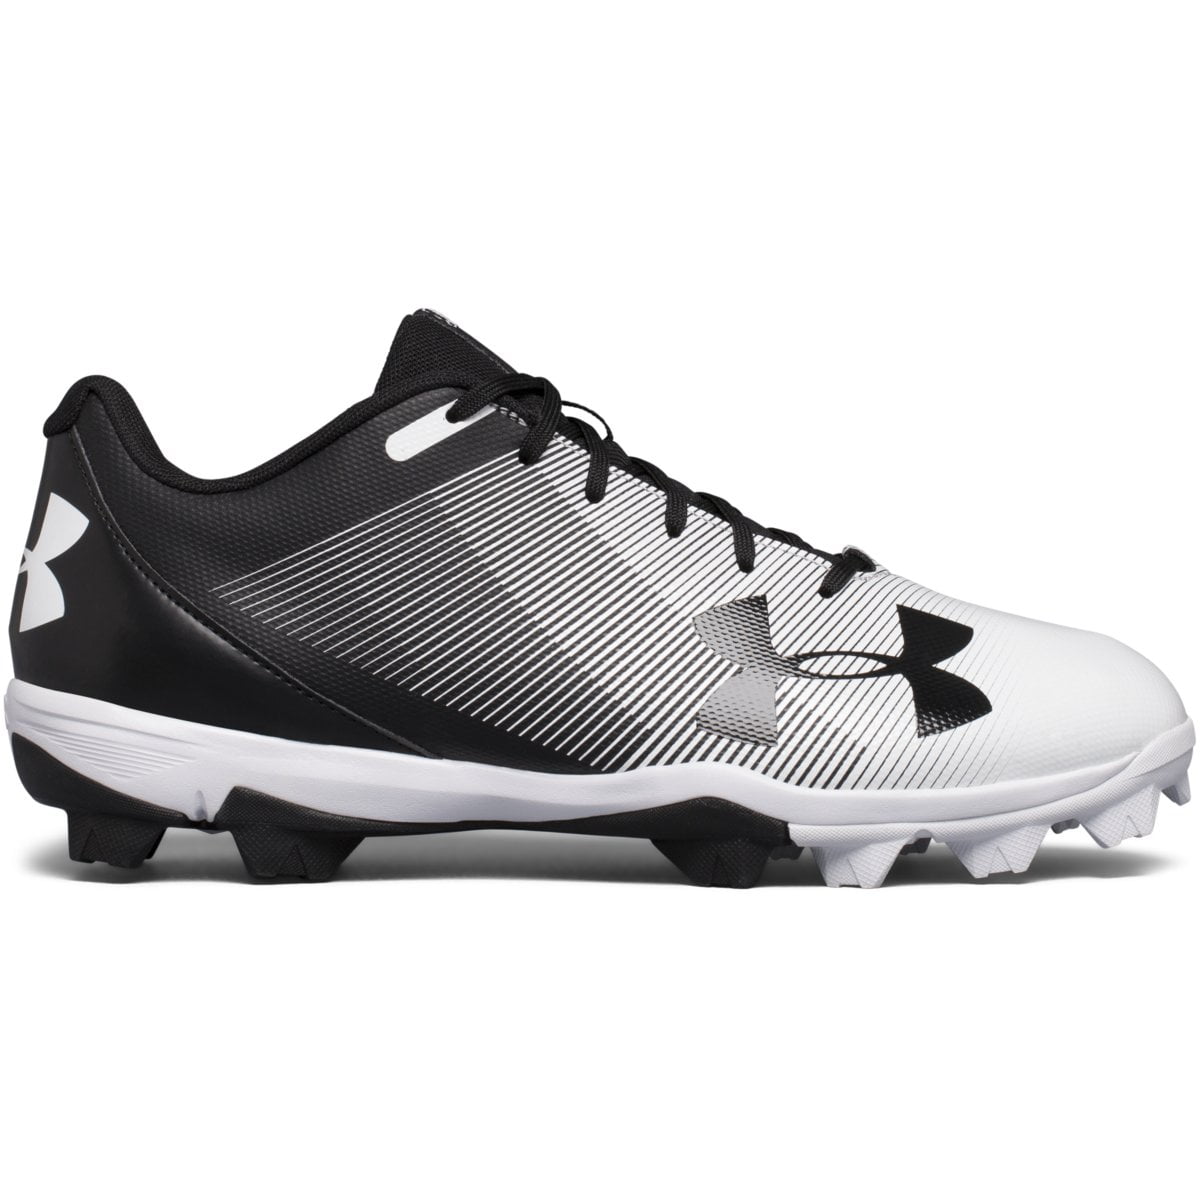 New Men's Under Armour Leadoff Low RM Baseball Cleats Black/White Size 7.5 M 